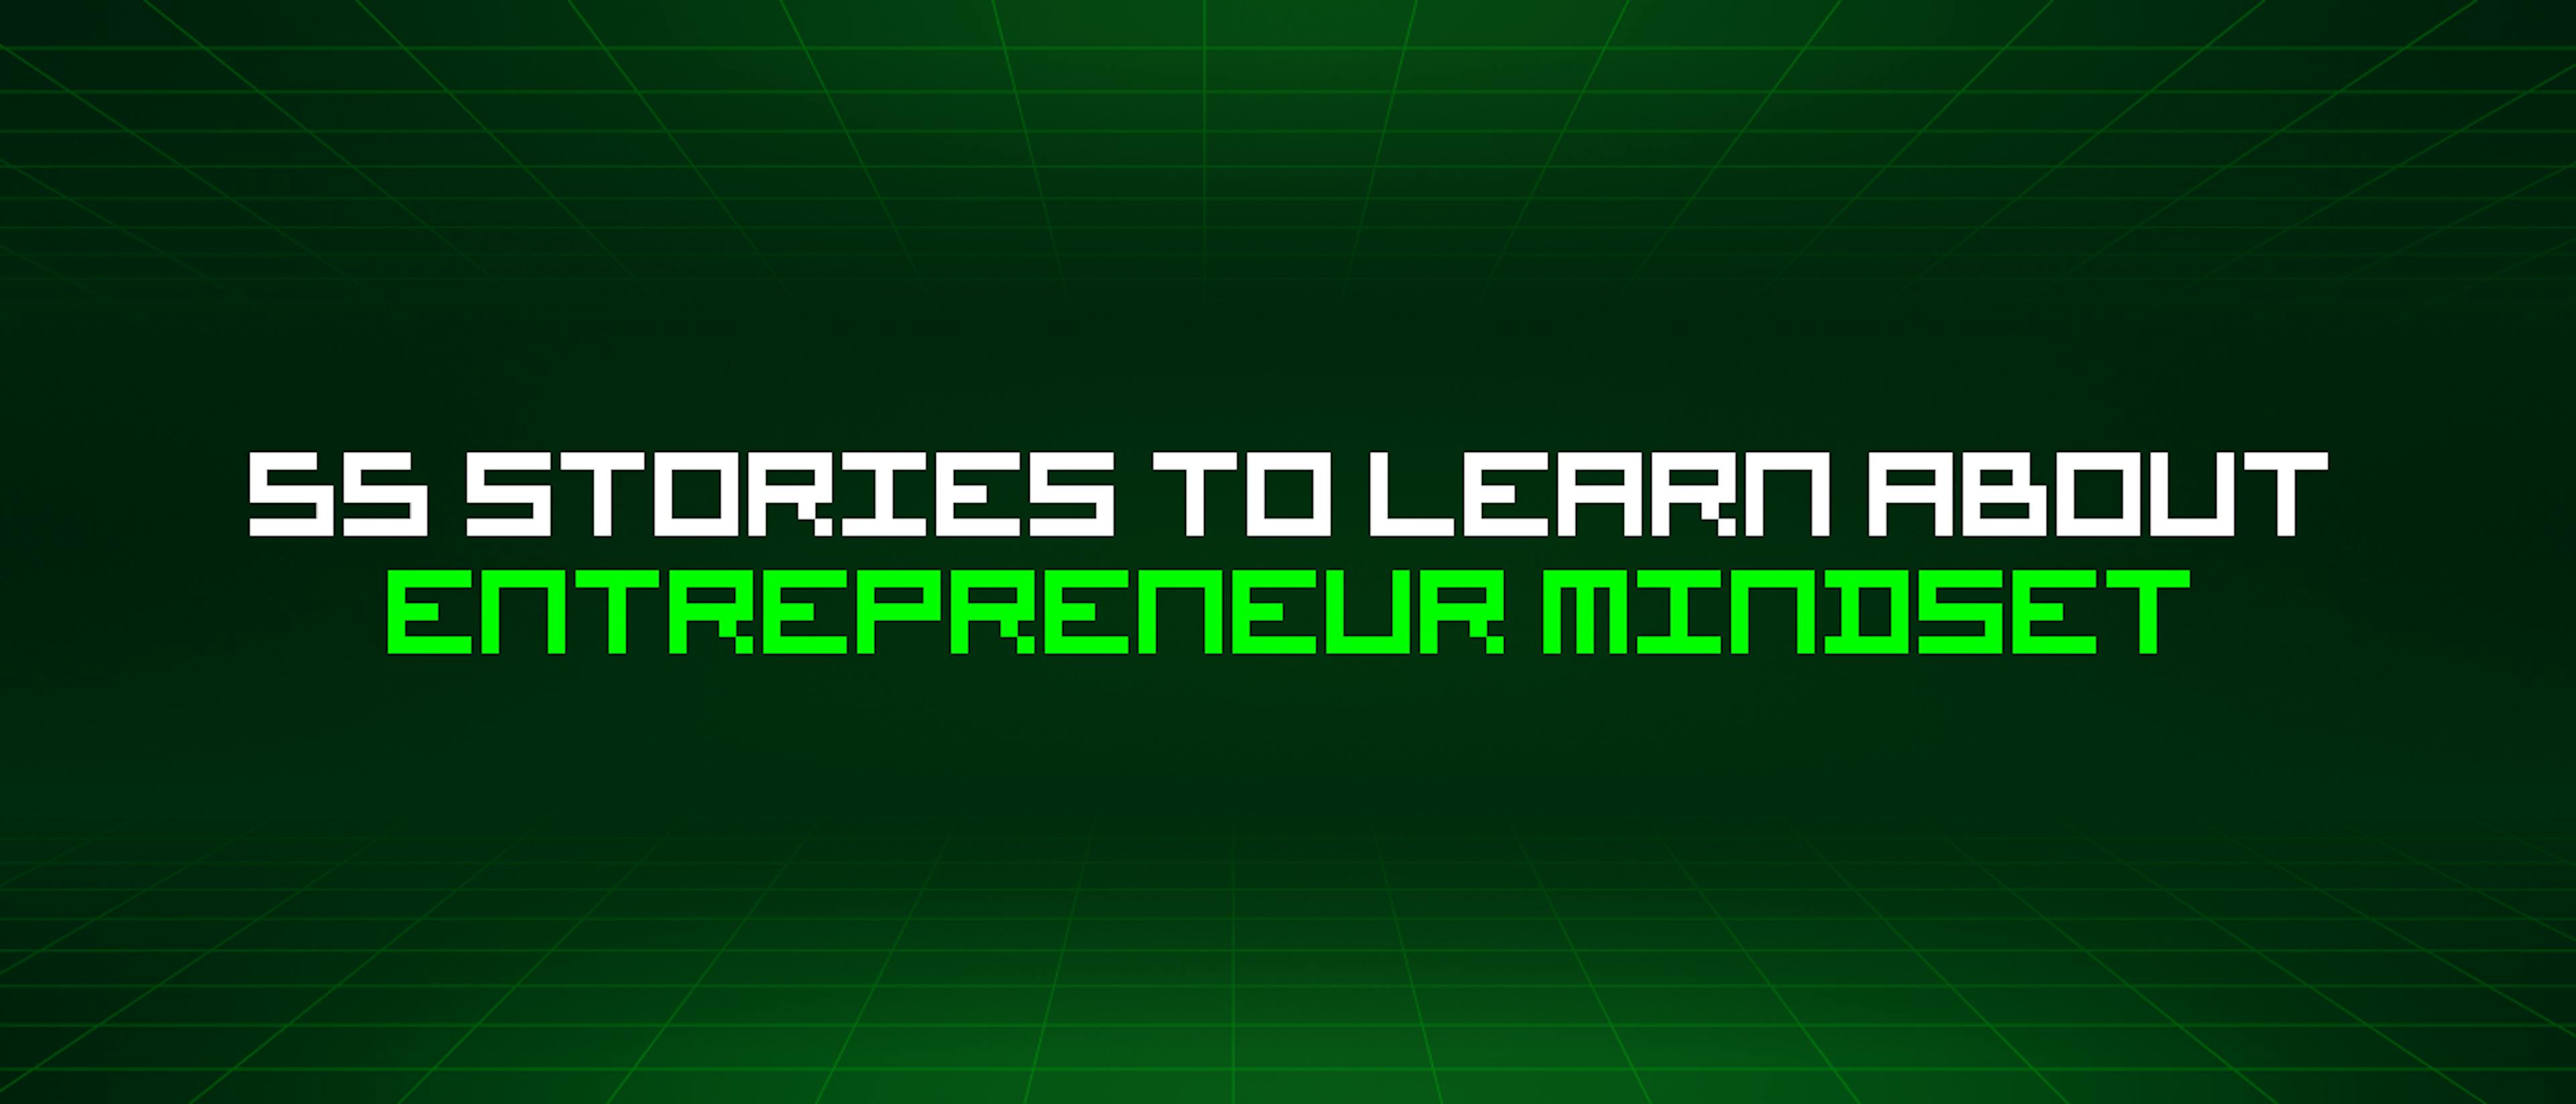 featured image - 55 Stories To Learn About Entrepreneur Mindset